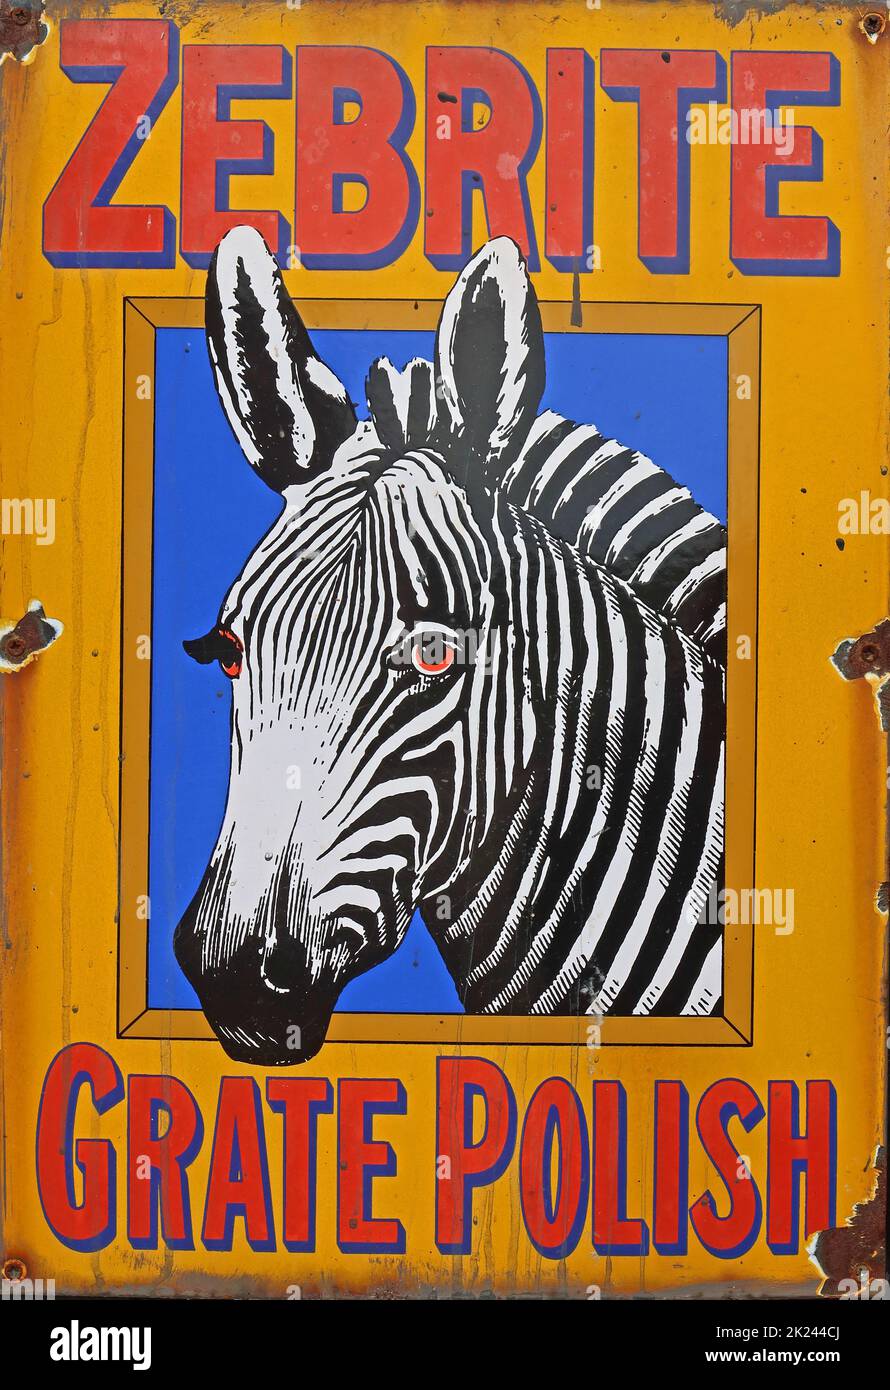 Metal enamel advertising sign for Zebrite, grate polish, 1920s with a zebra Stock Photo